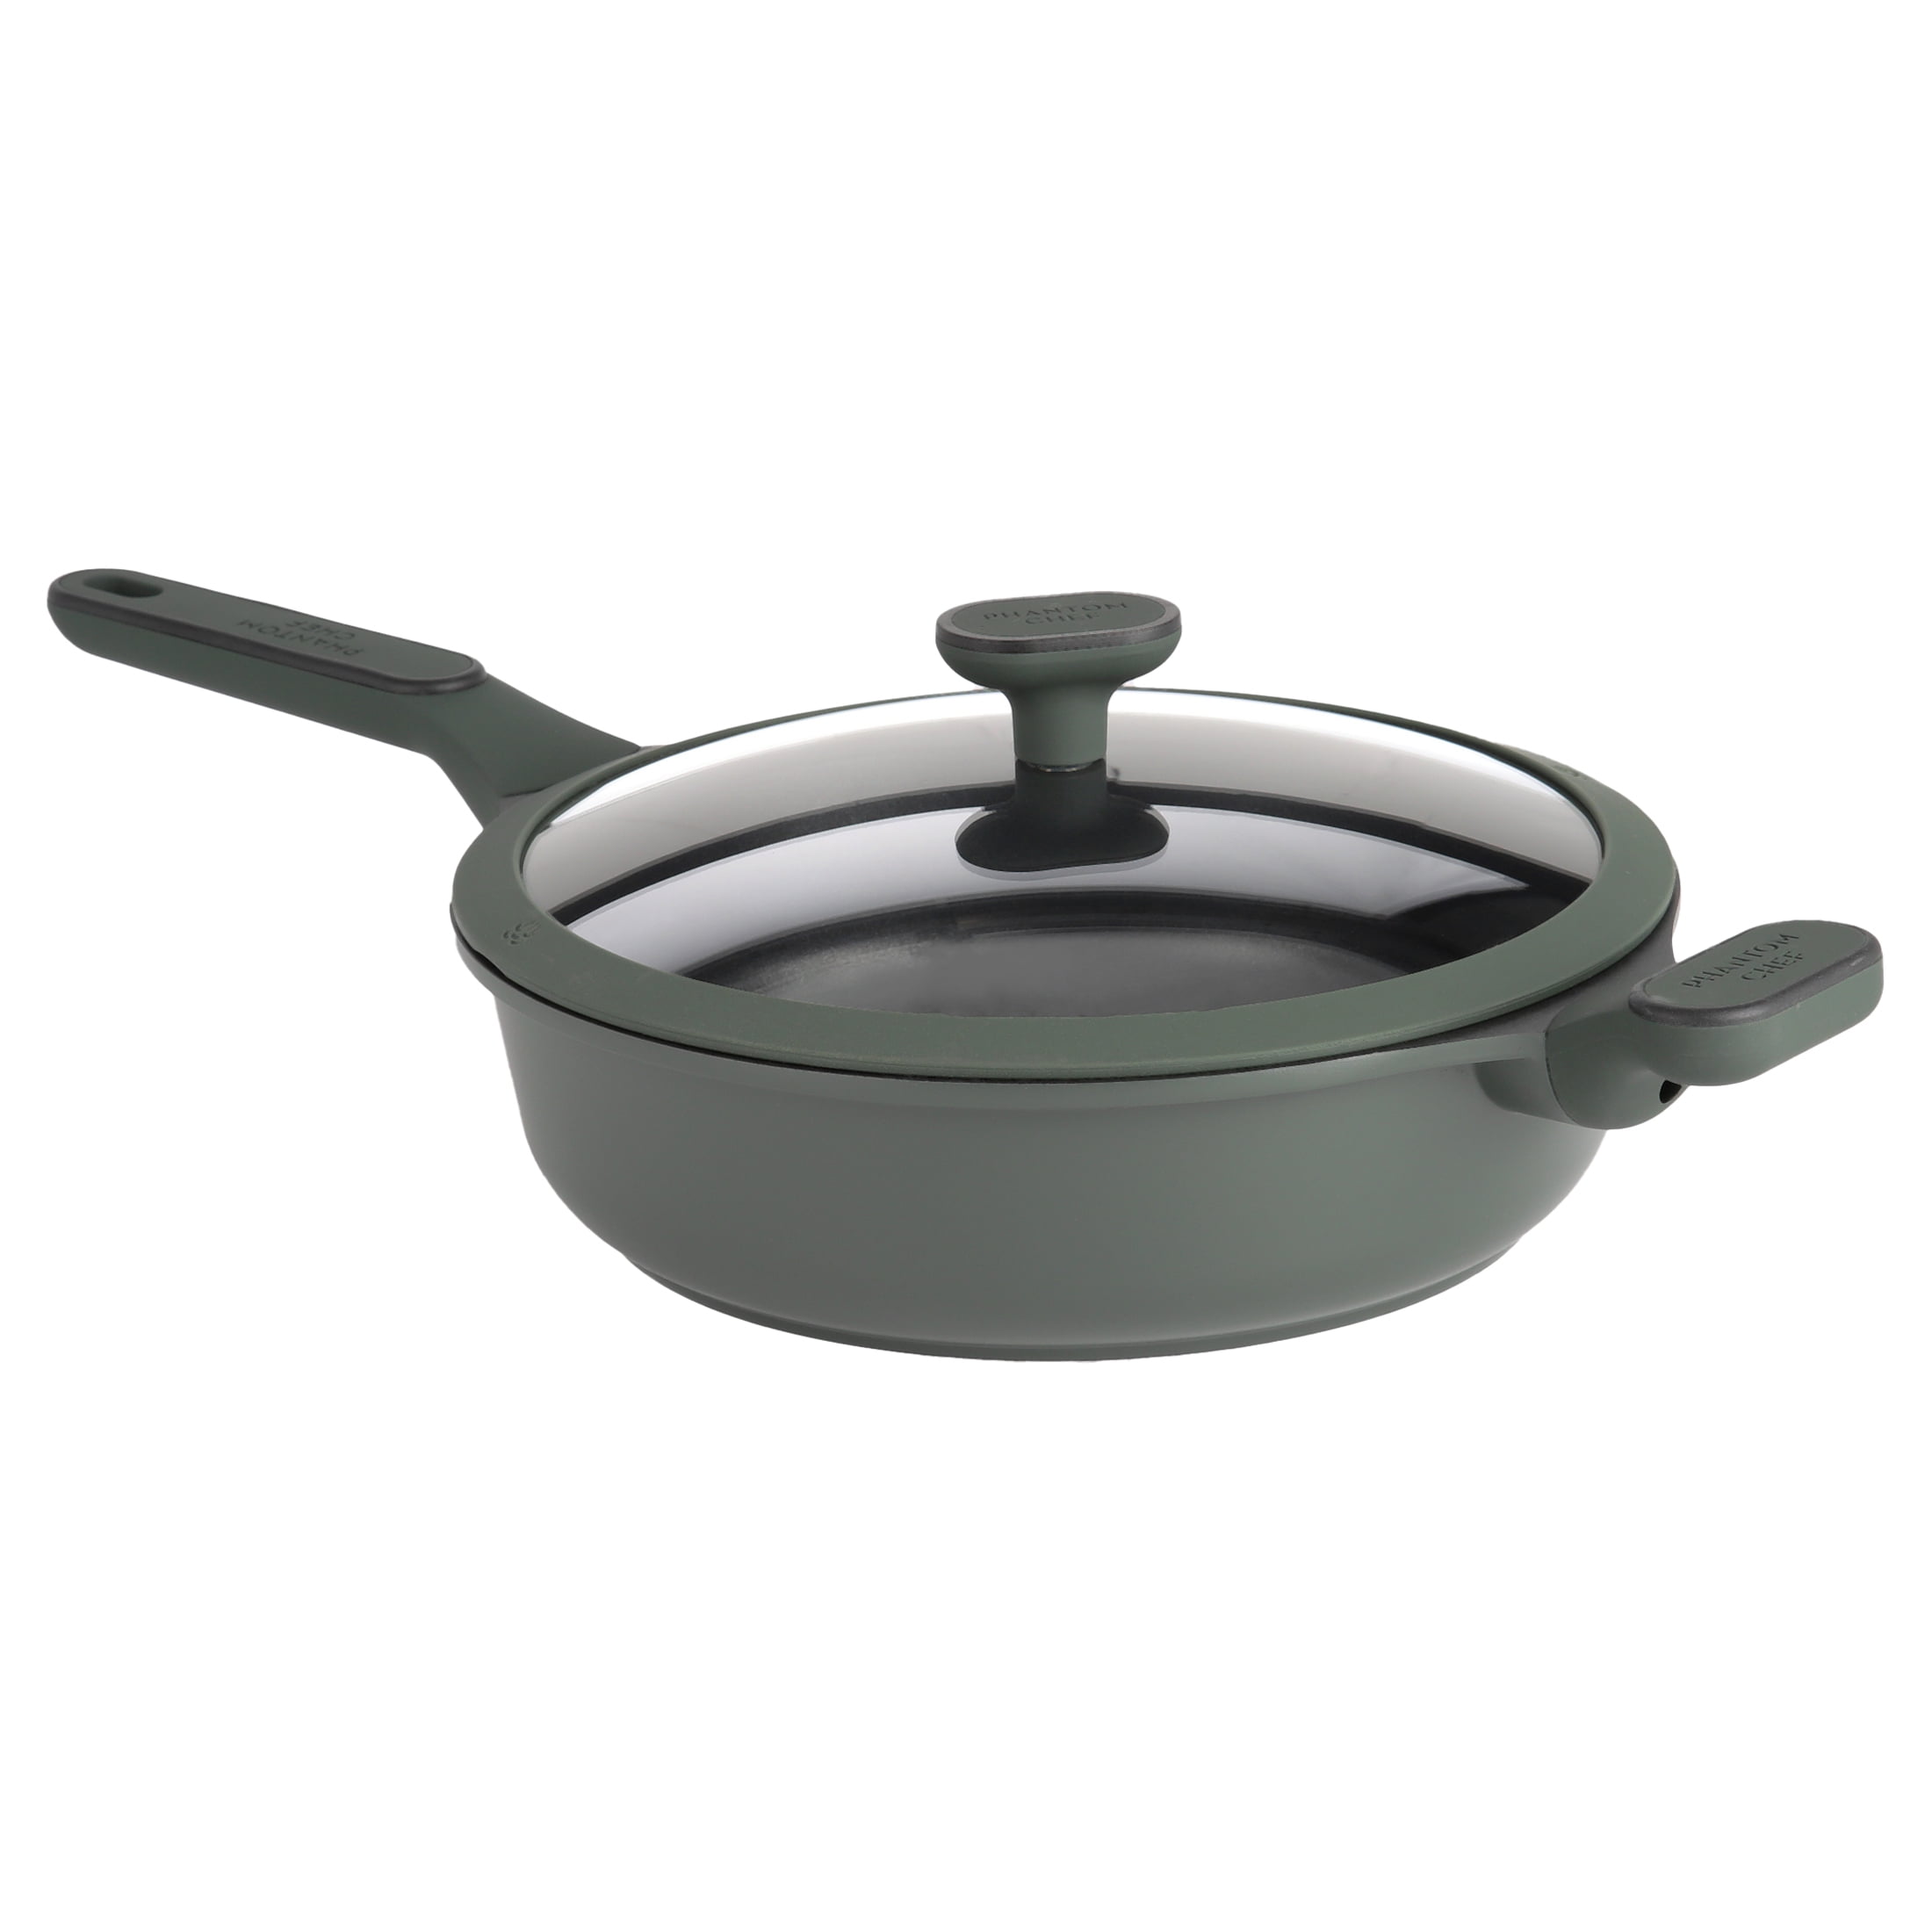 Phantom Chef 10-in Green Non-Stick Aluminum Cooking Pan with Wood Handle -  Induction Compatible in the Cooking Pans & Skillets department at